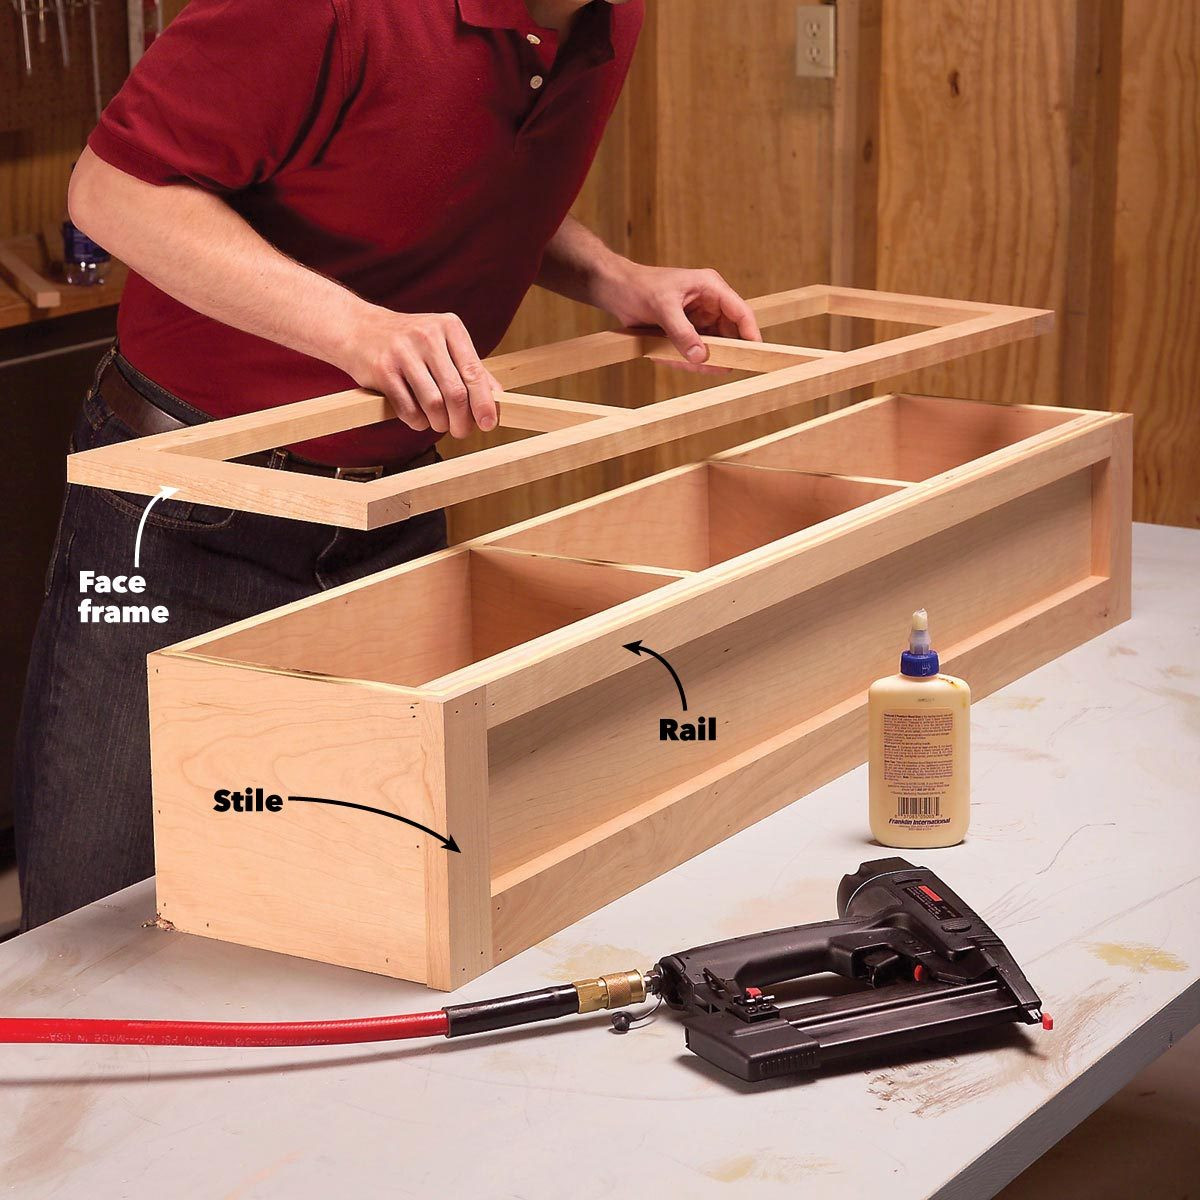 Coat Bench Storage
 How to Build an Entryway Coat Rack and Storage Bench